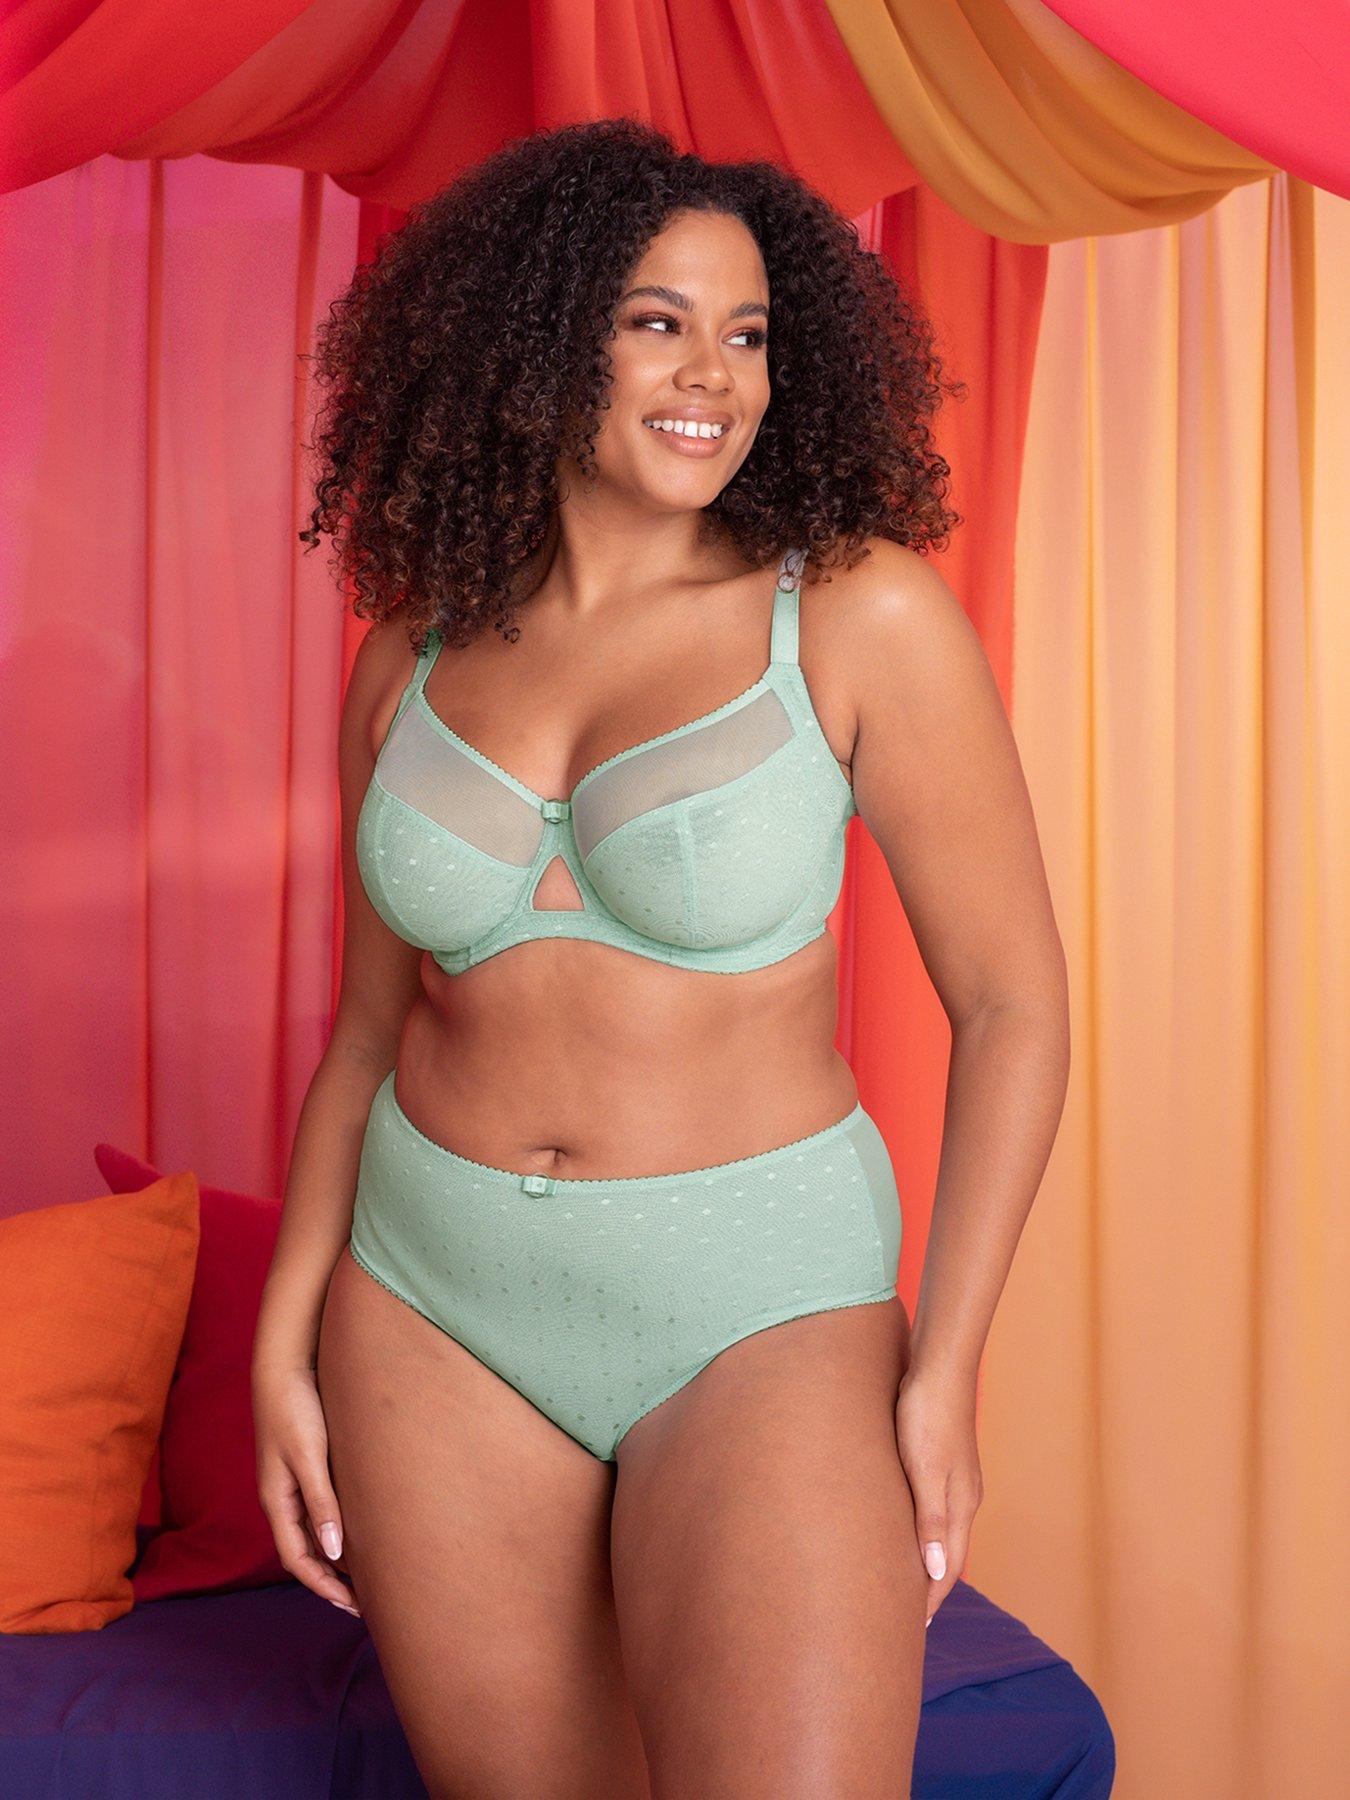 Victory (Latte) by Curvy Kate - Everyday bras